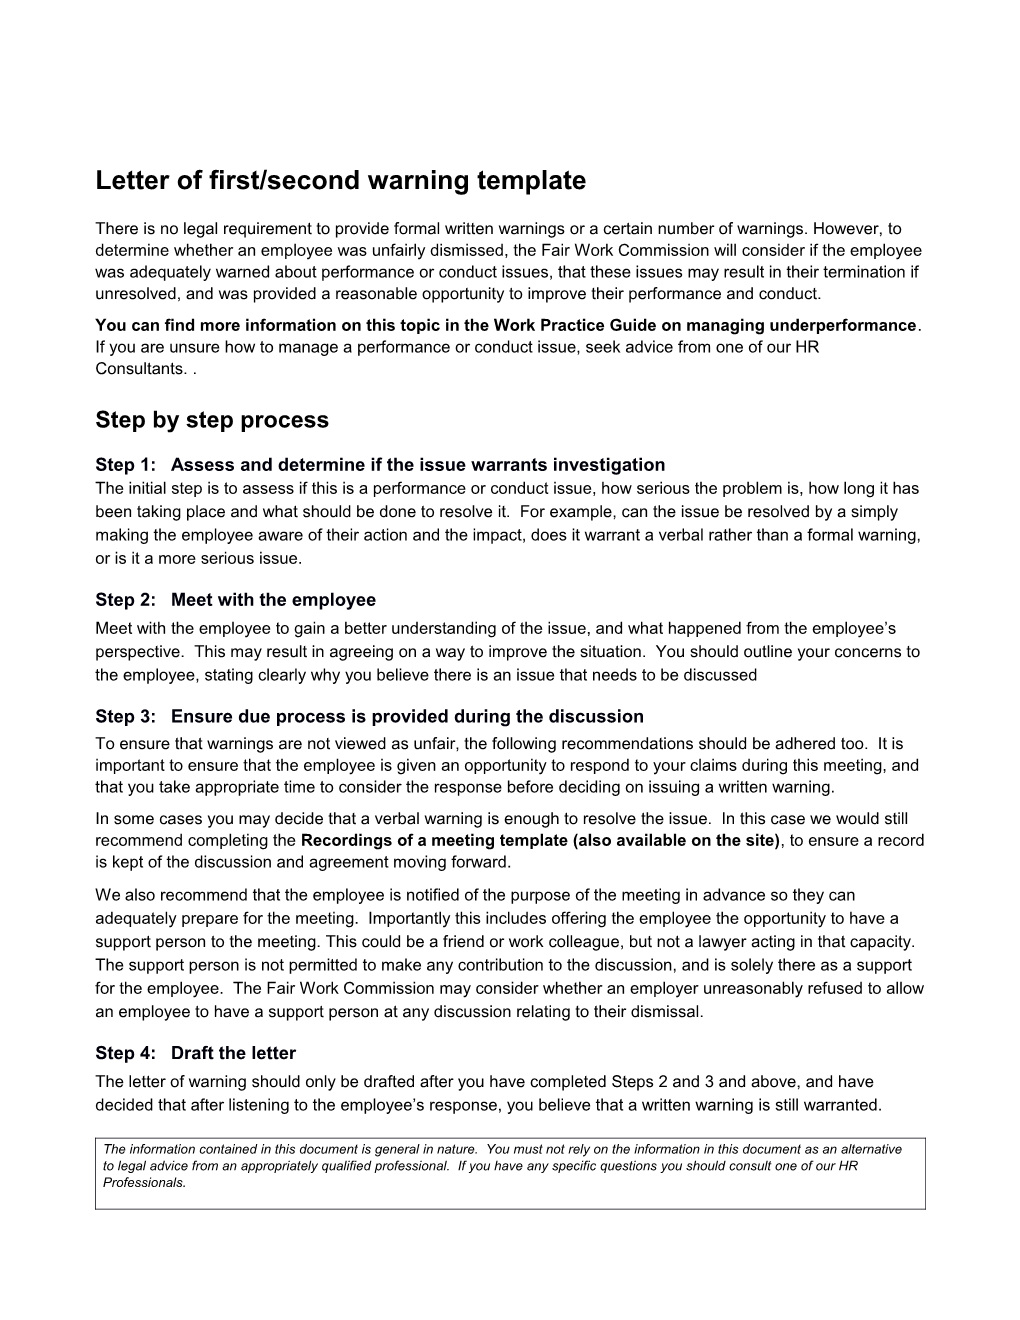 Letter of First/Second Warning Template